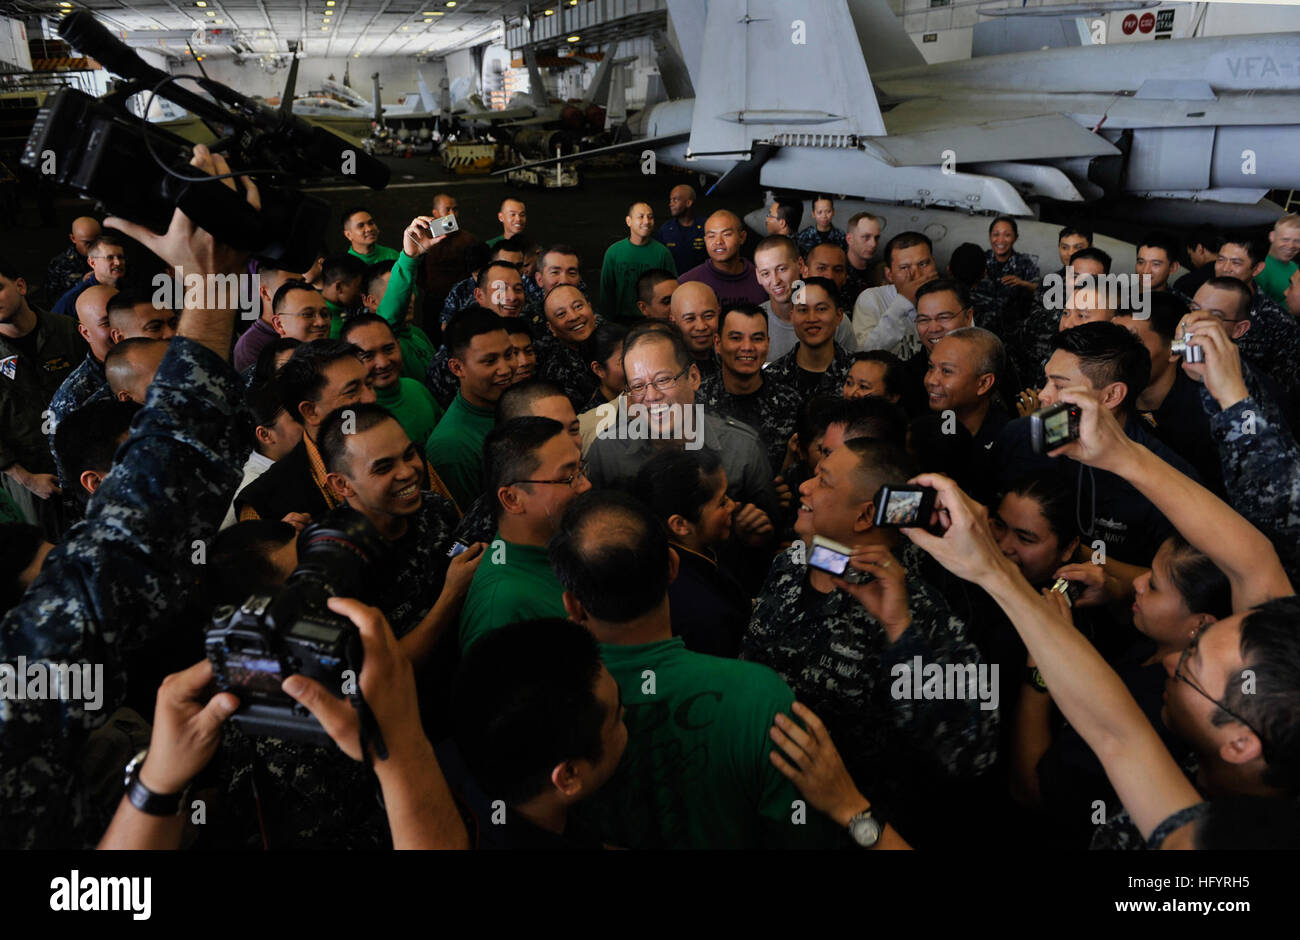 110514-N-DR144-590 PACIFIC OCEAN (May 14, 2011) Republic of the Philippines President Benigno Aquino III meets with Filipino Sailors in the hangar bay aboard the Nimitz-class aircraft carrier USS Carl Vinson (CVN 70). Carl Vinson and Carrier Air Wing (CVW) 17 are currently underway in the U.S. 7th Fleet area of responsibility. (U.S. Navy photo by Mass Communication Specialist 2nd Class James R. Evans/Released) US Navy 110514-N-DR144-590 Republic of the Philippines President Benigno Aquino III meets with Filipino Sailors in the hangar bay aboard the Nimitz Stock Photo